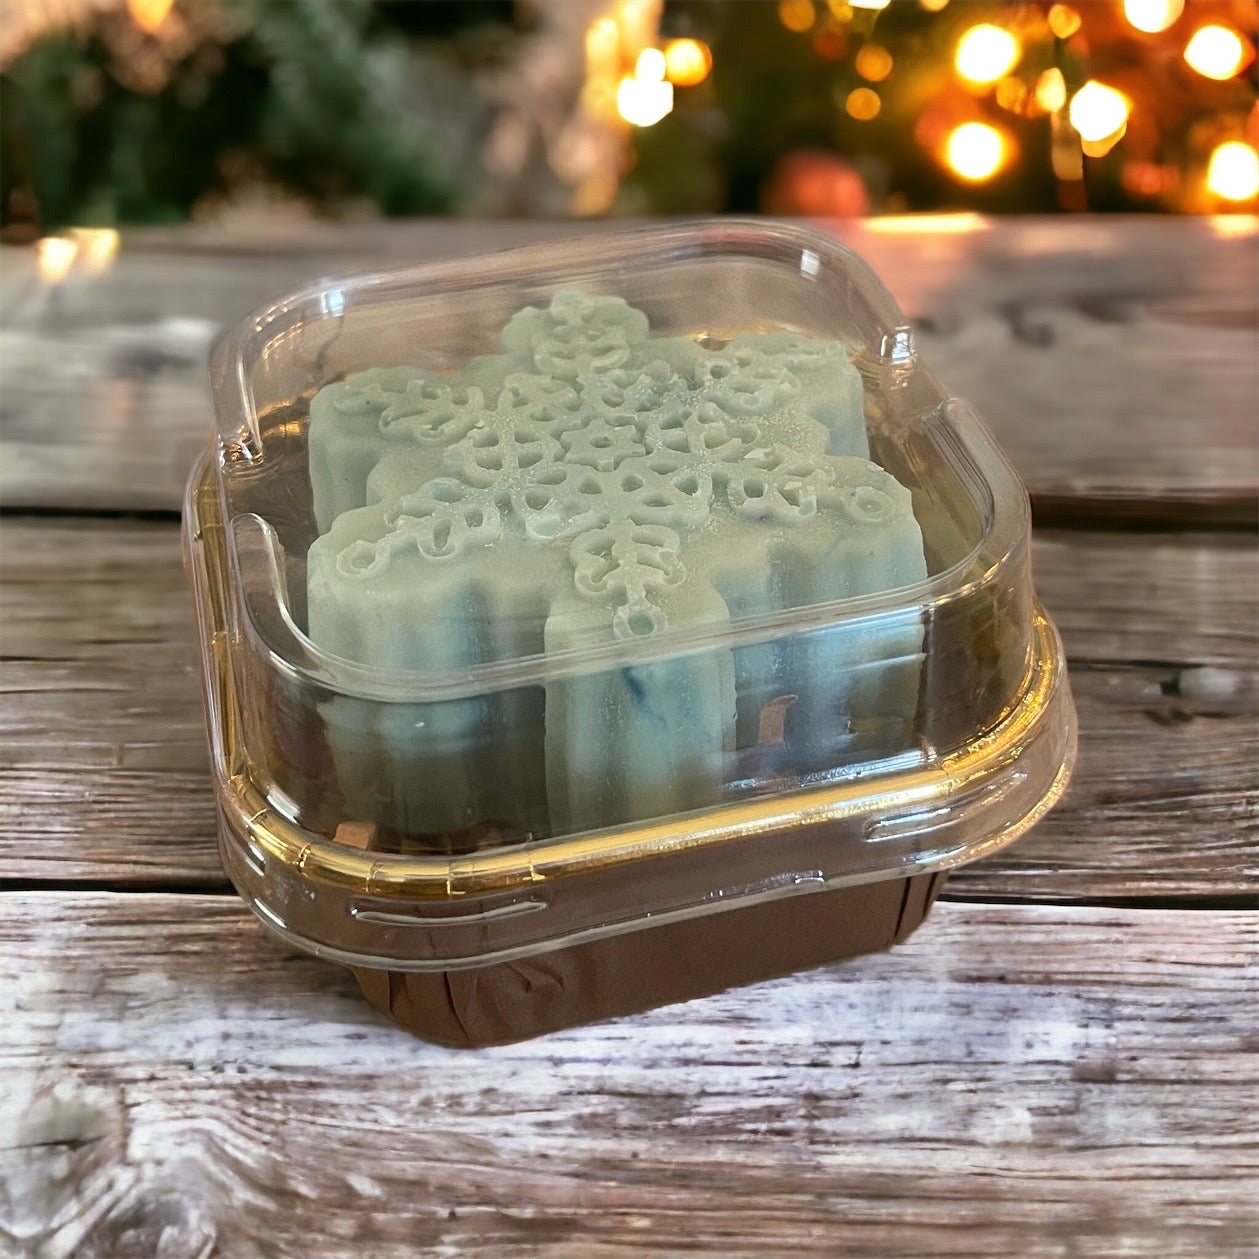 Goat Milk Soap | Frosted Sugar Plum Snowflake Soap | Handmade, Handcrafted Soap